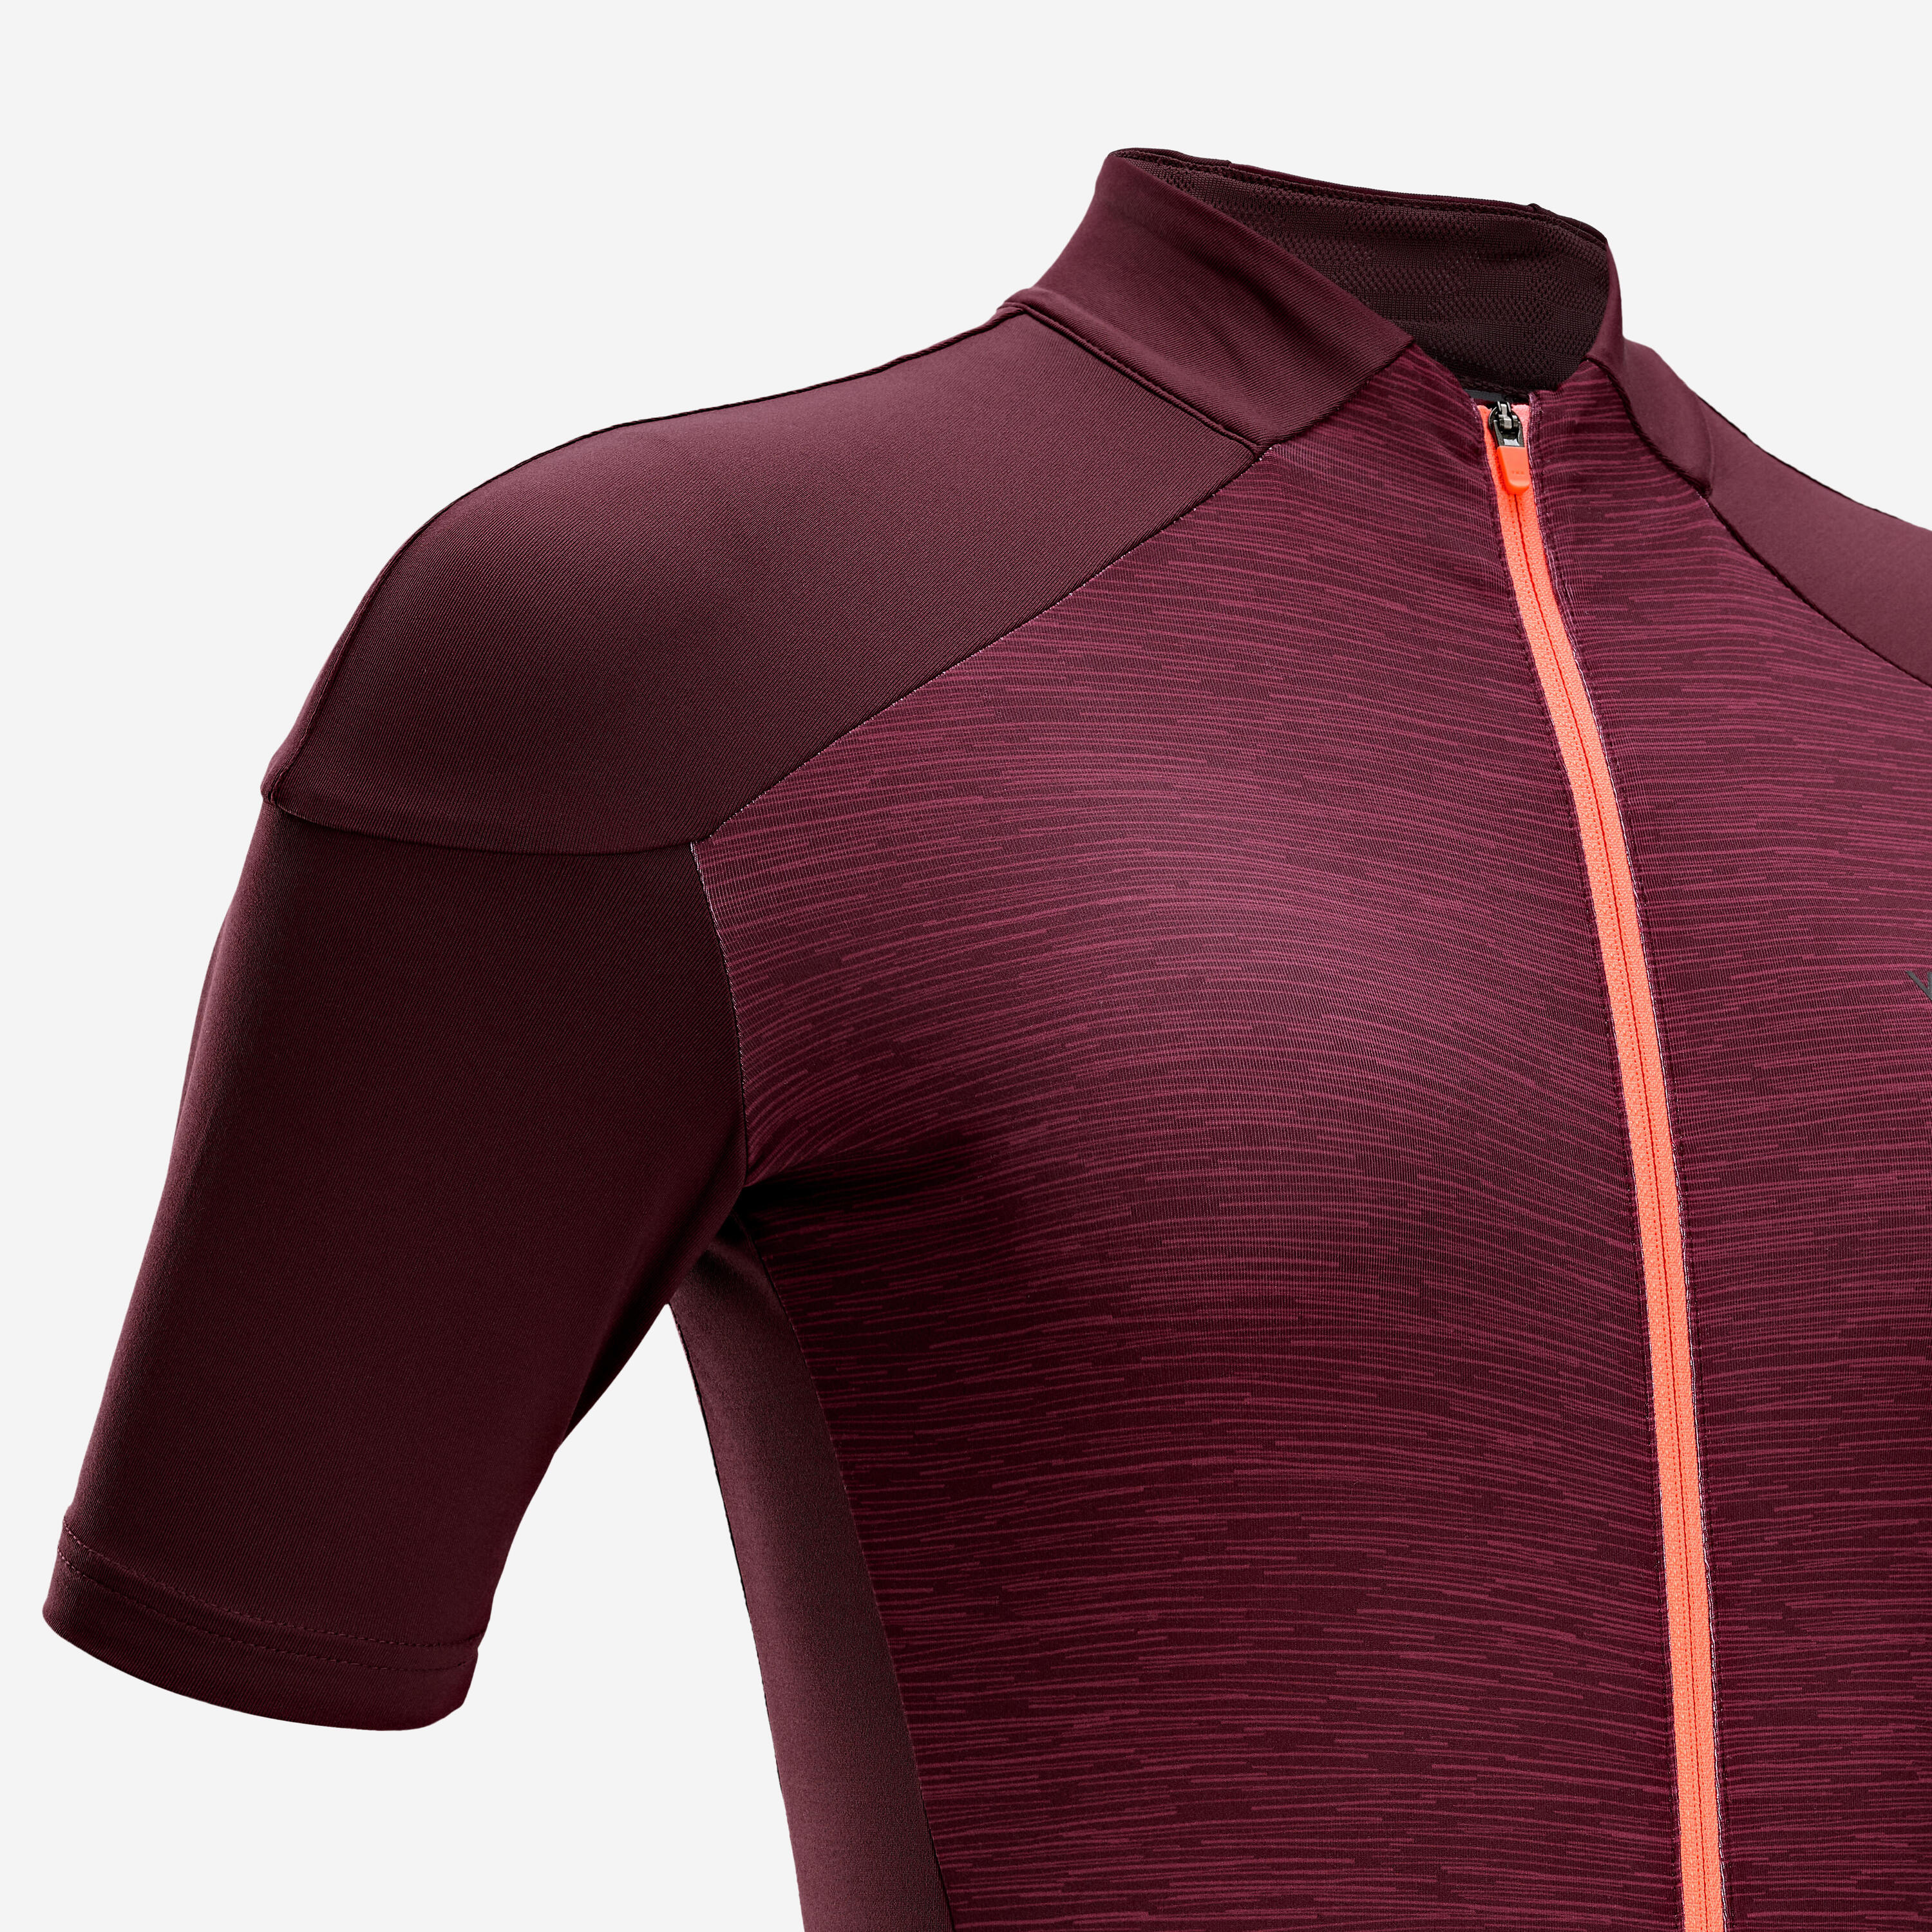 Women's Short-Sleeved Road Cycling Jersey 500 - Burgundy 5/7